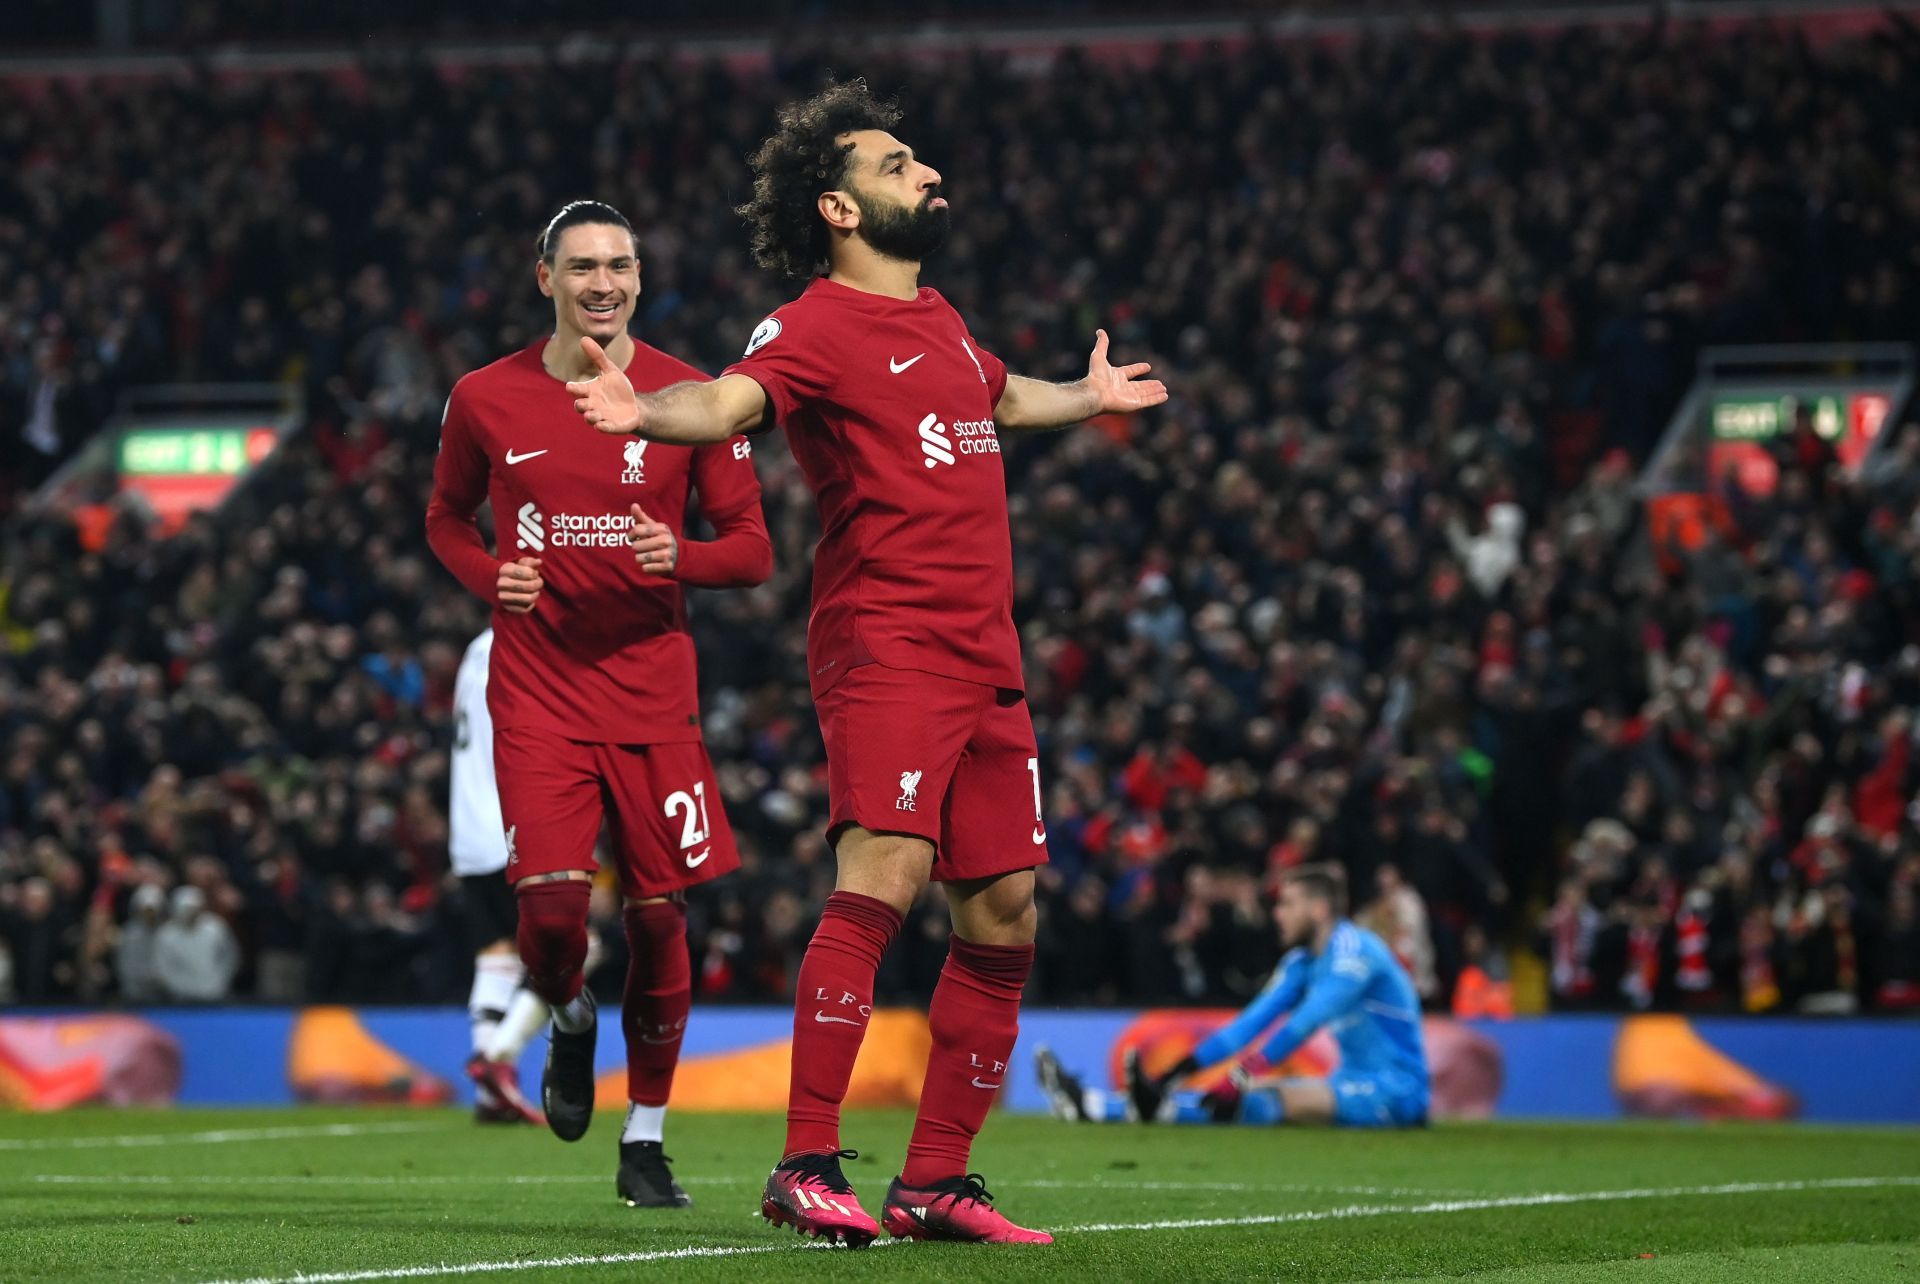 Mohamed Salah is set for Real Madrid clash tonight